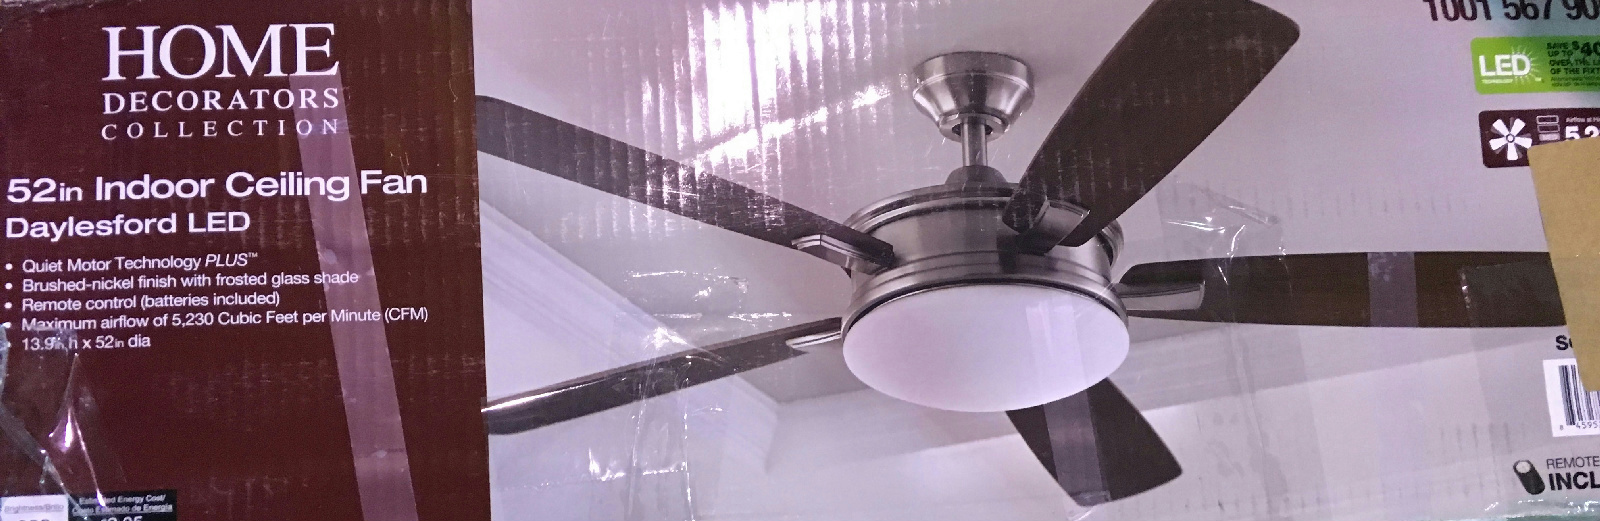 Home Decorators Collection Daylesford 52 in. LED Brushed Nickel Ceiling Fan eBay